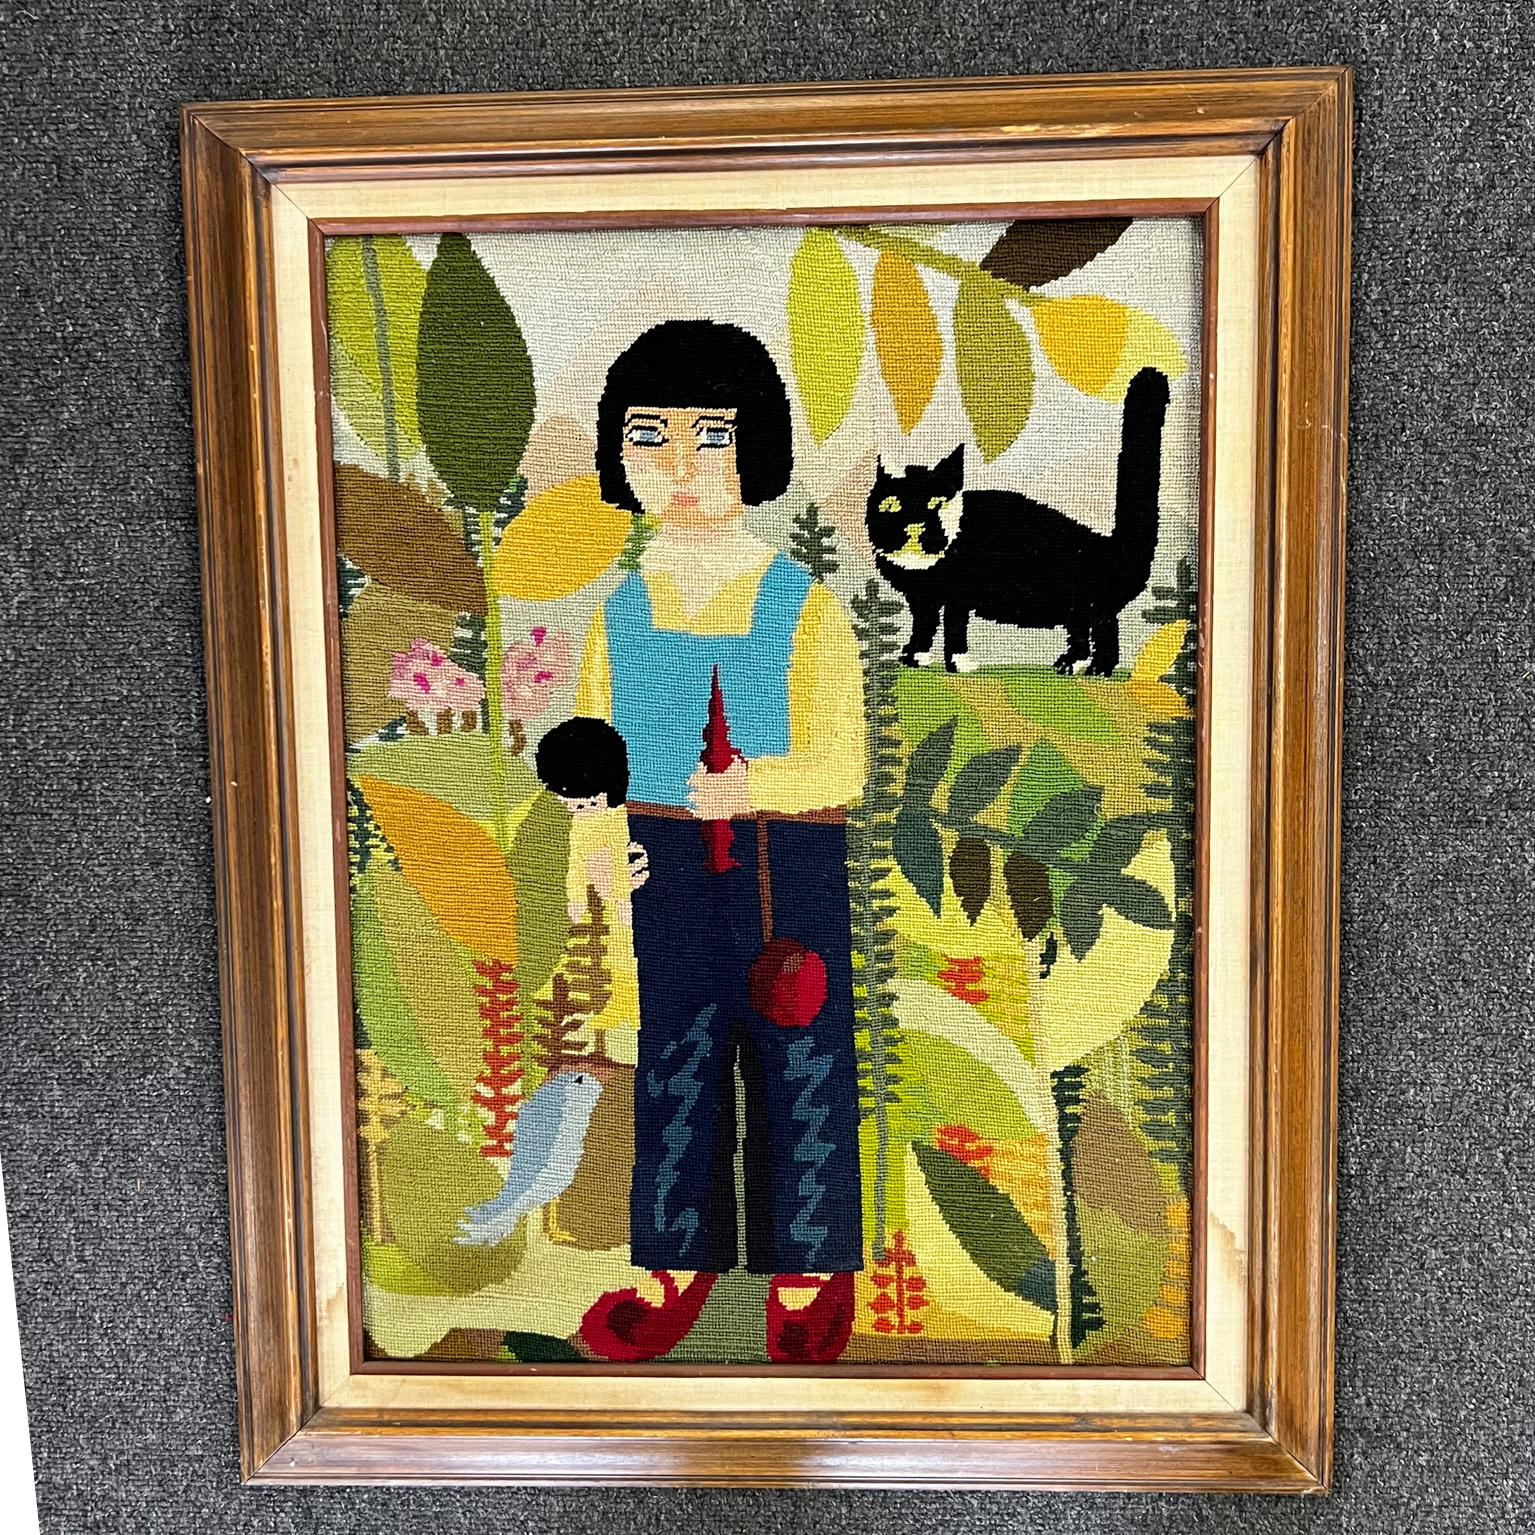 1970s Vibrant Handmade Needlepoint Embroidery Artwork Girl Doll and Cat
Handmade embroidery portrait
framed
no signature 
24 x 30 x 2.13 d art 17.5 x 23.5
Original vintage condition
See all images.

